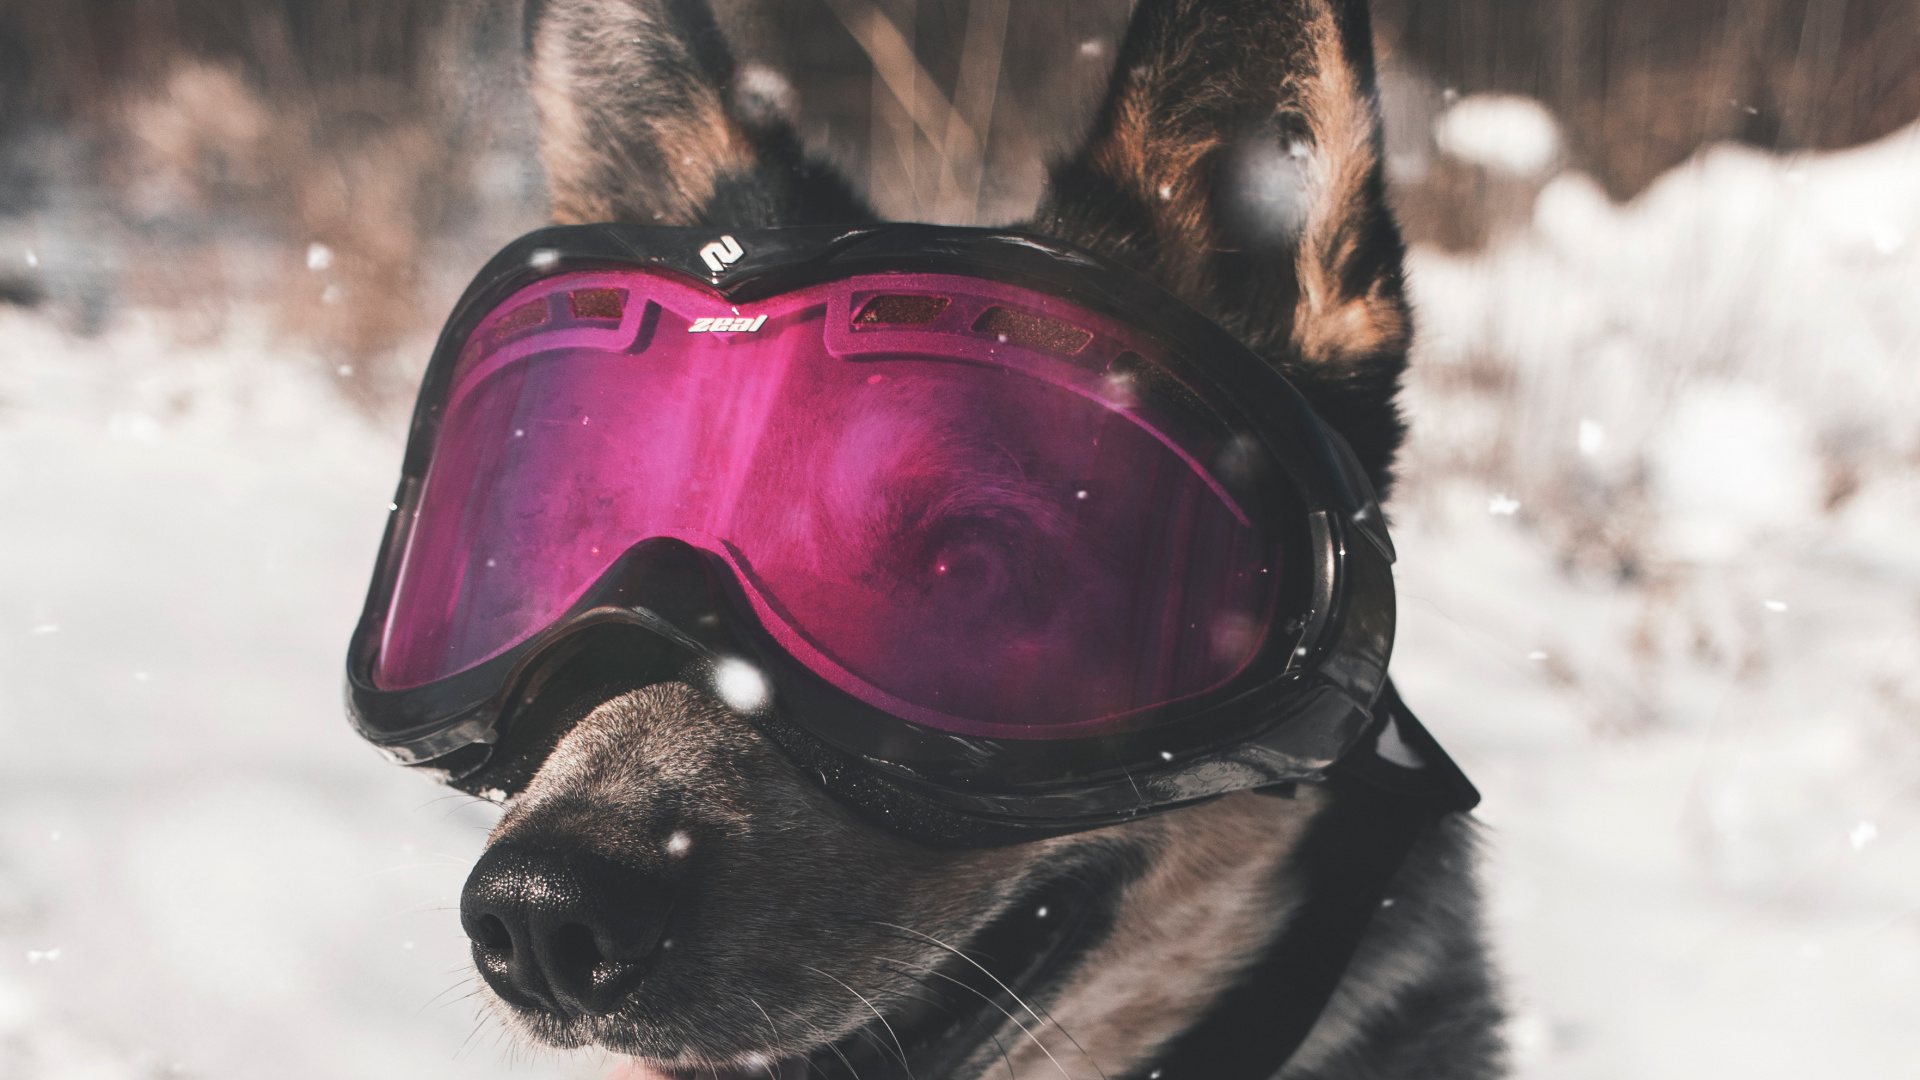 Black and Brown Short Coated Dog Wearing Red Goggles on Snow Covered Ground During Daytime. Wallpaper in 1920x1080 Resolution